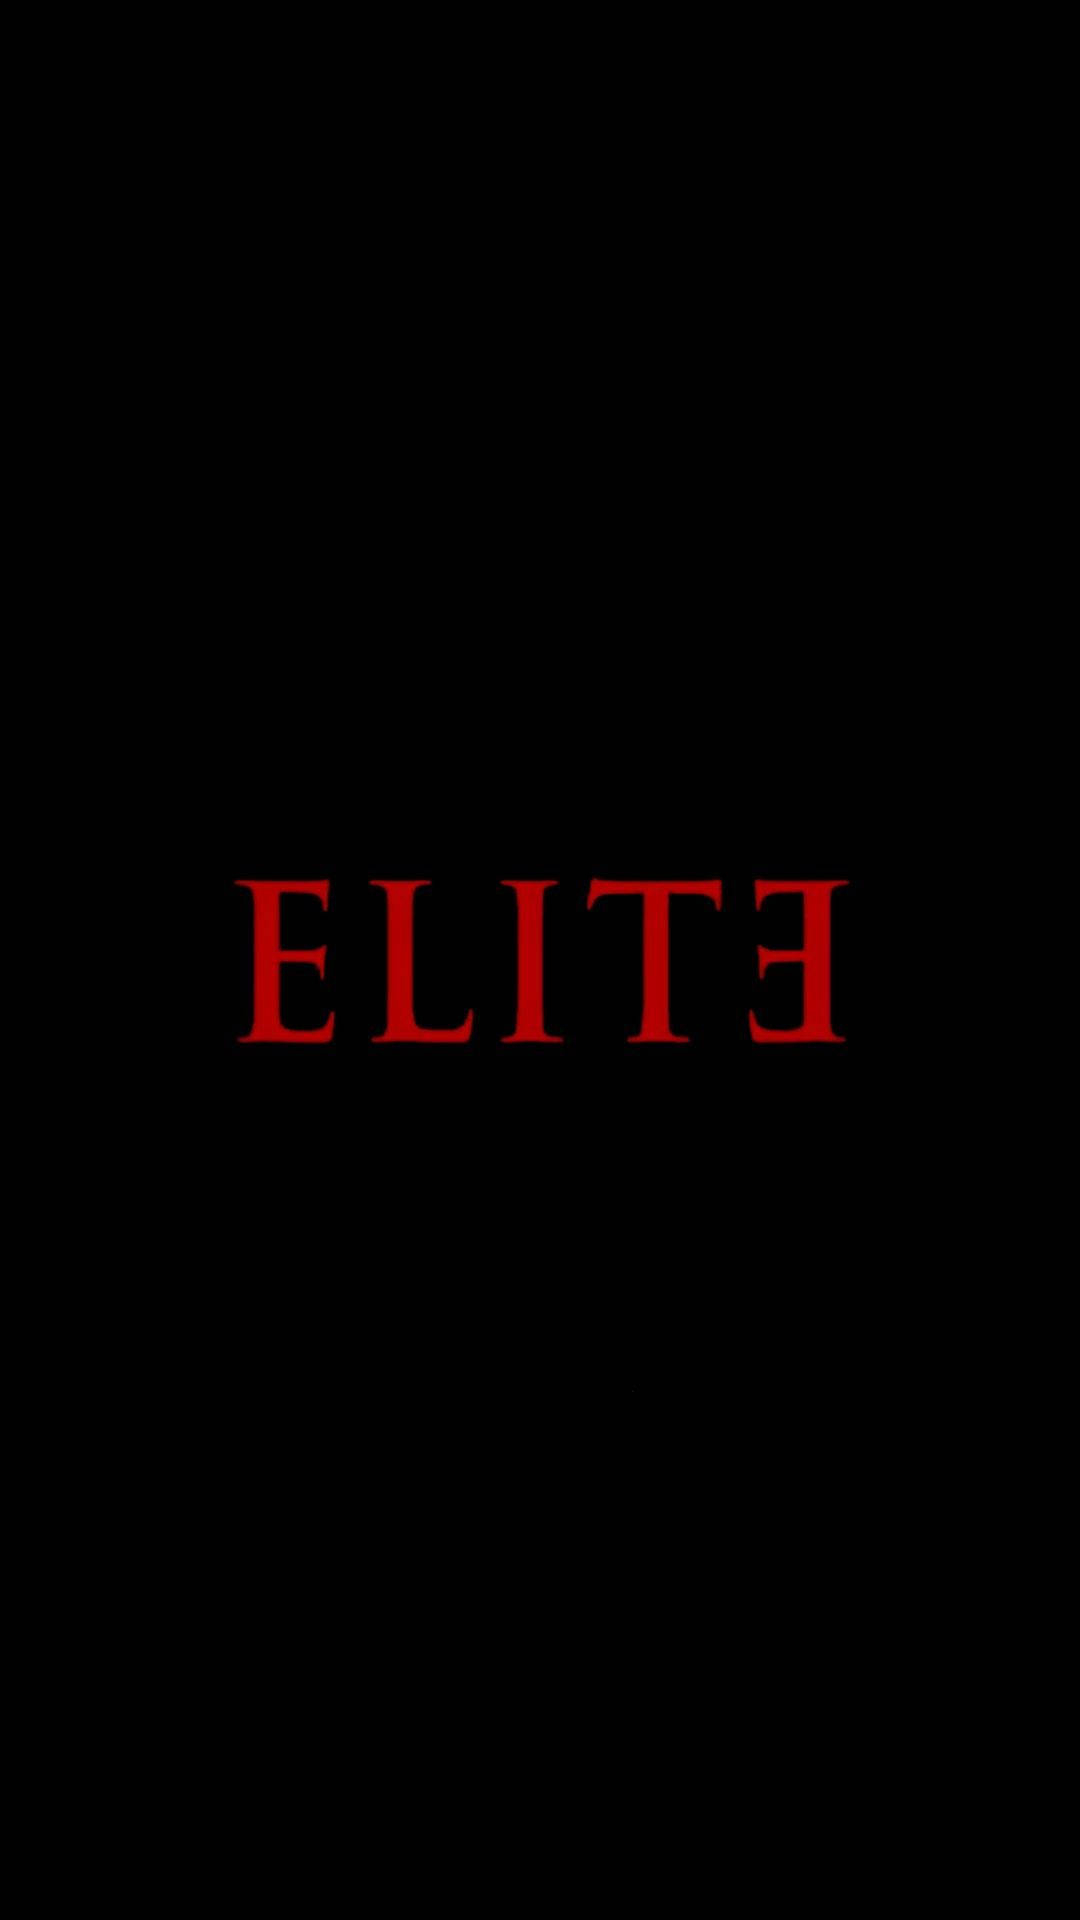 Netflix's Elite wallpaper with a red lettering in the middle that spells out 